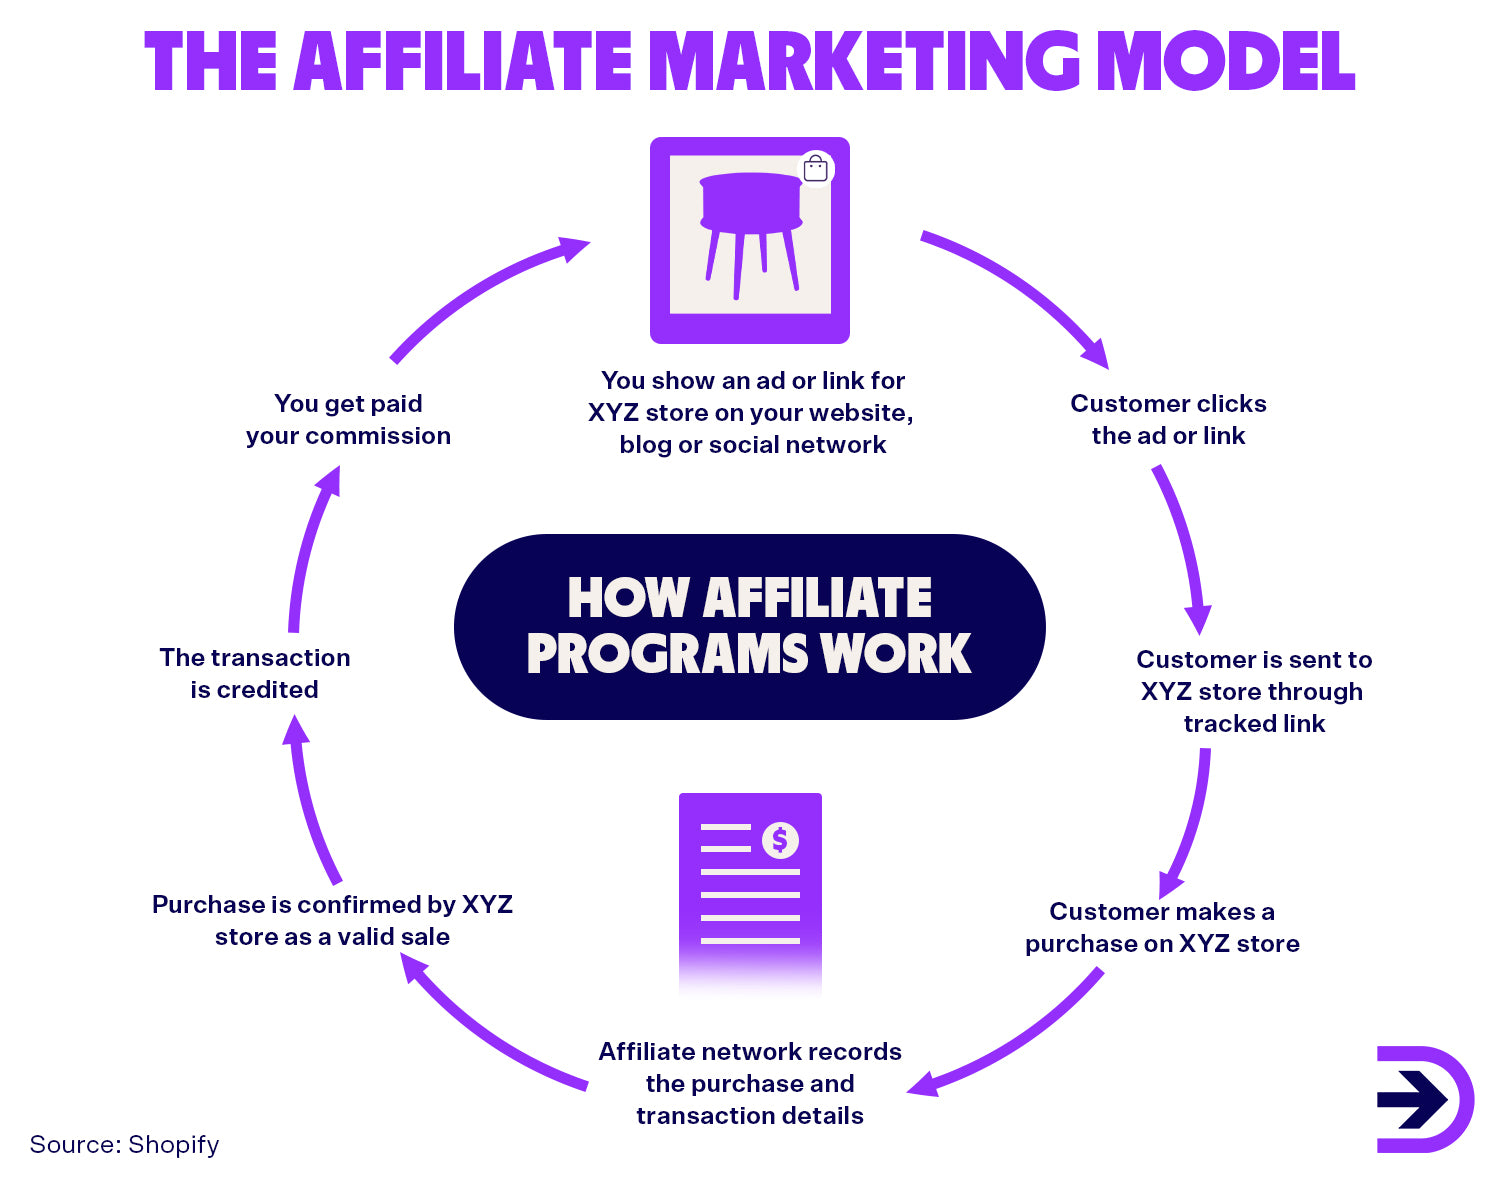 The affiliate marketing model involves a customer clicking on an affiliate link and the affiliate receiving a commission from the affiliate network.